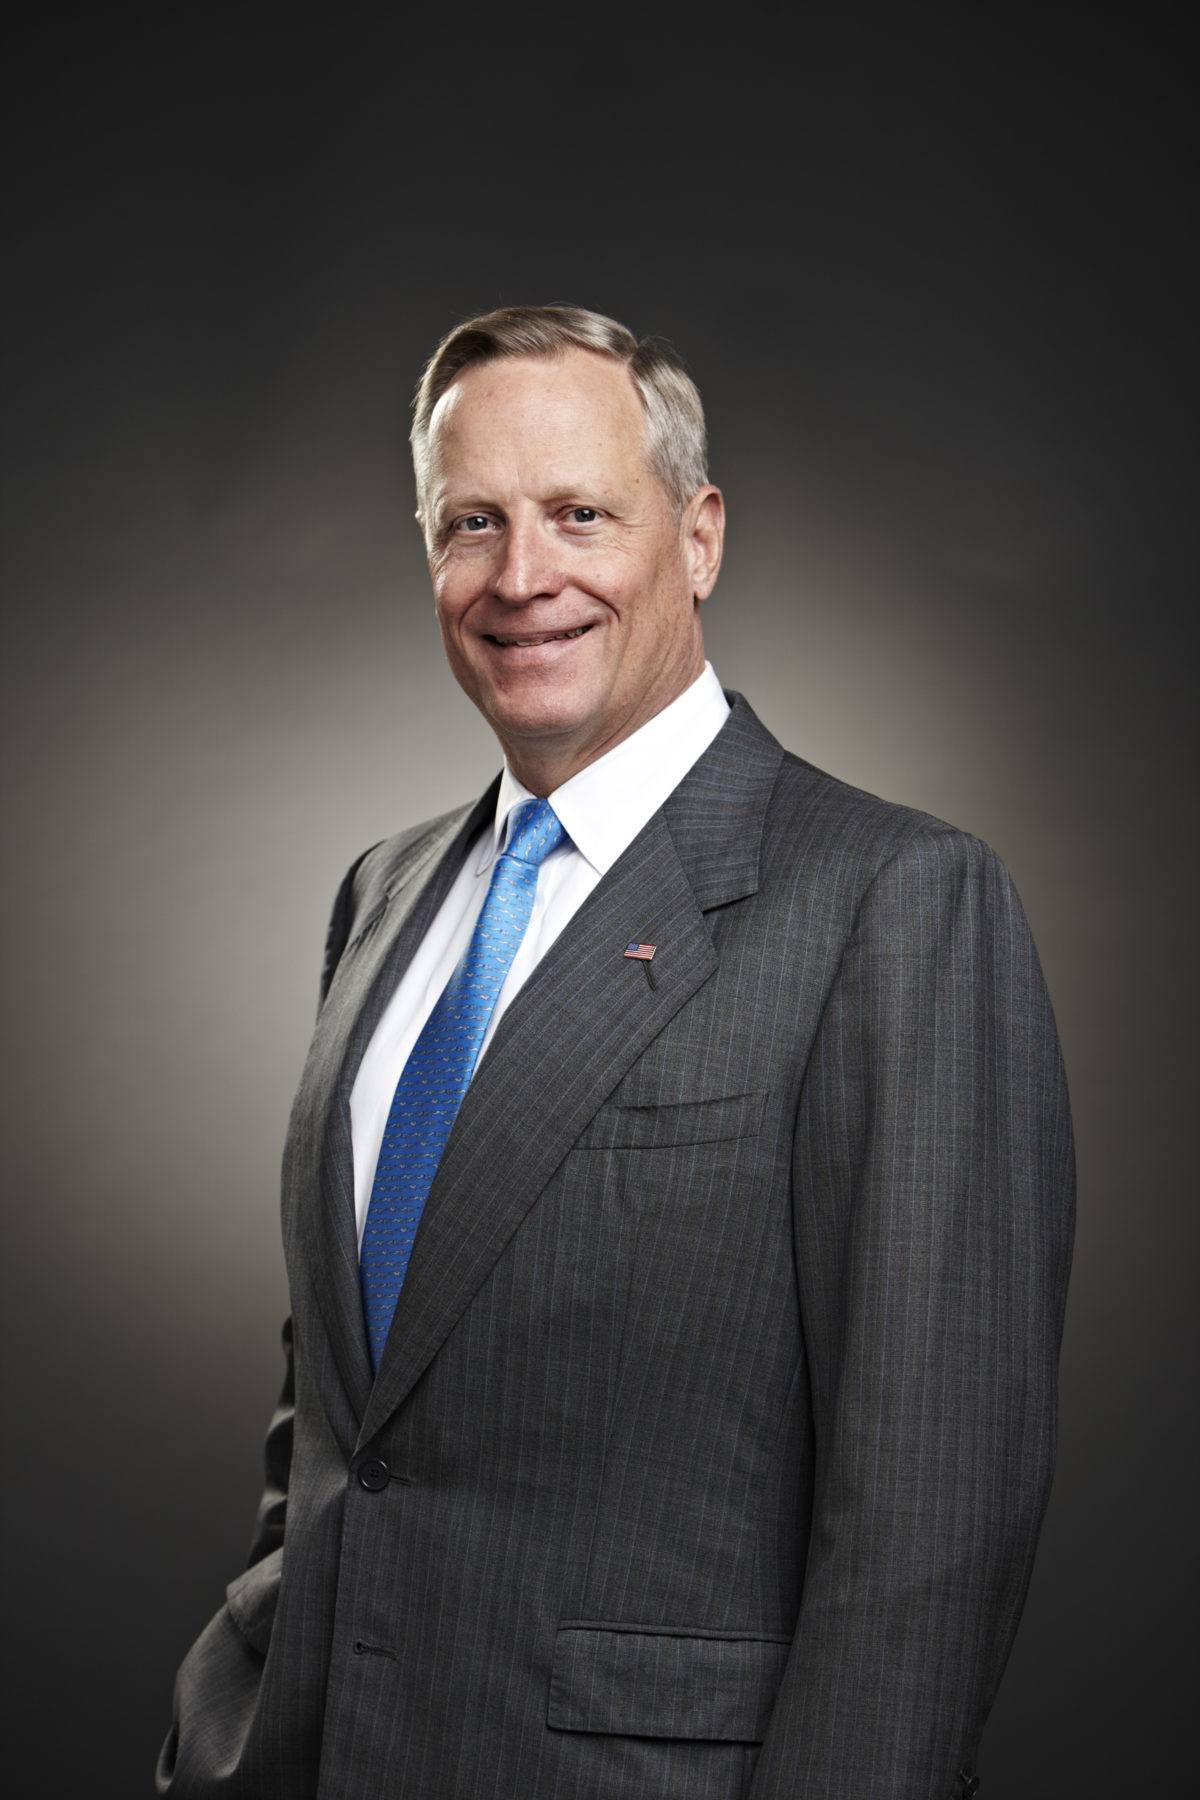 A headshot of Ross Perot Jr. smiling and wearing the grey suit and blue tie